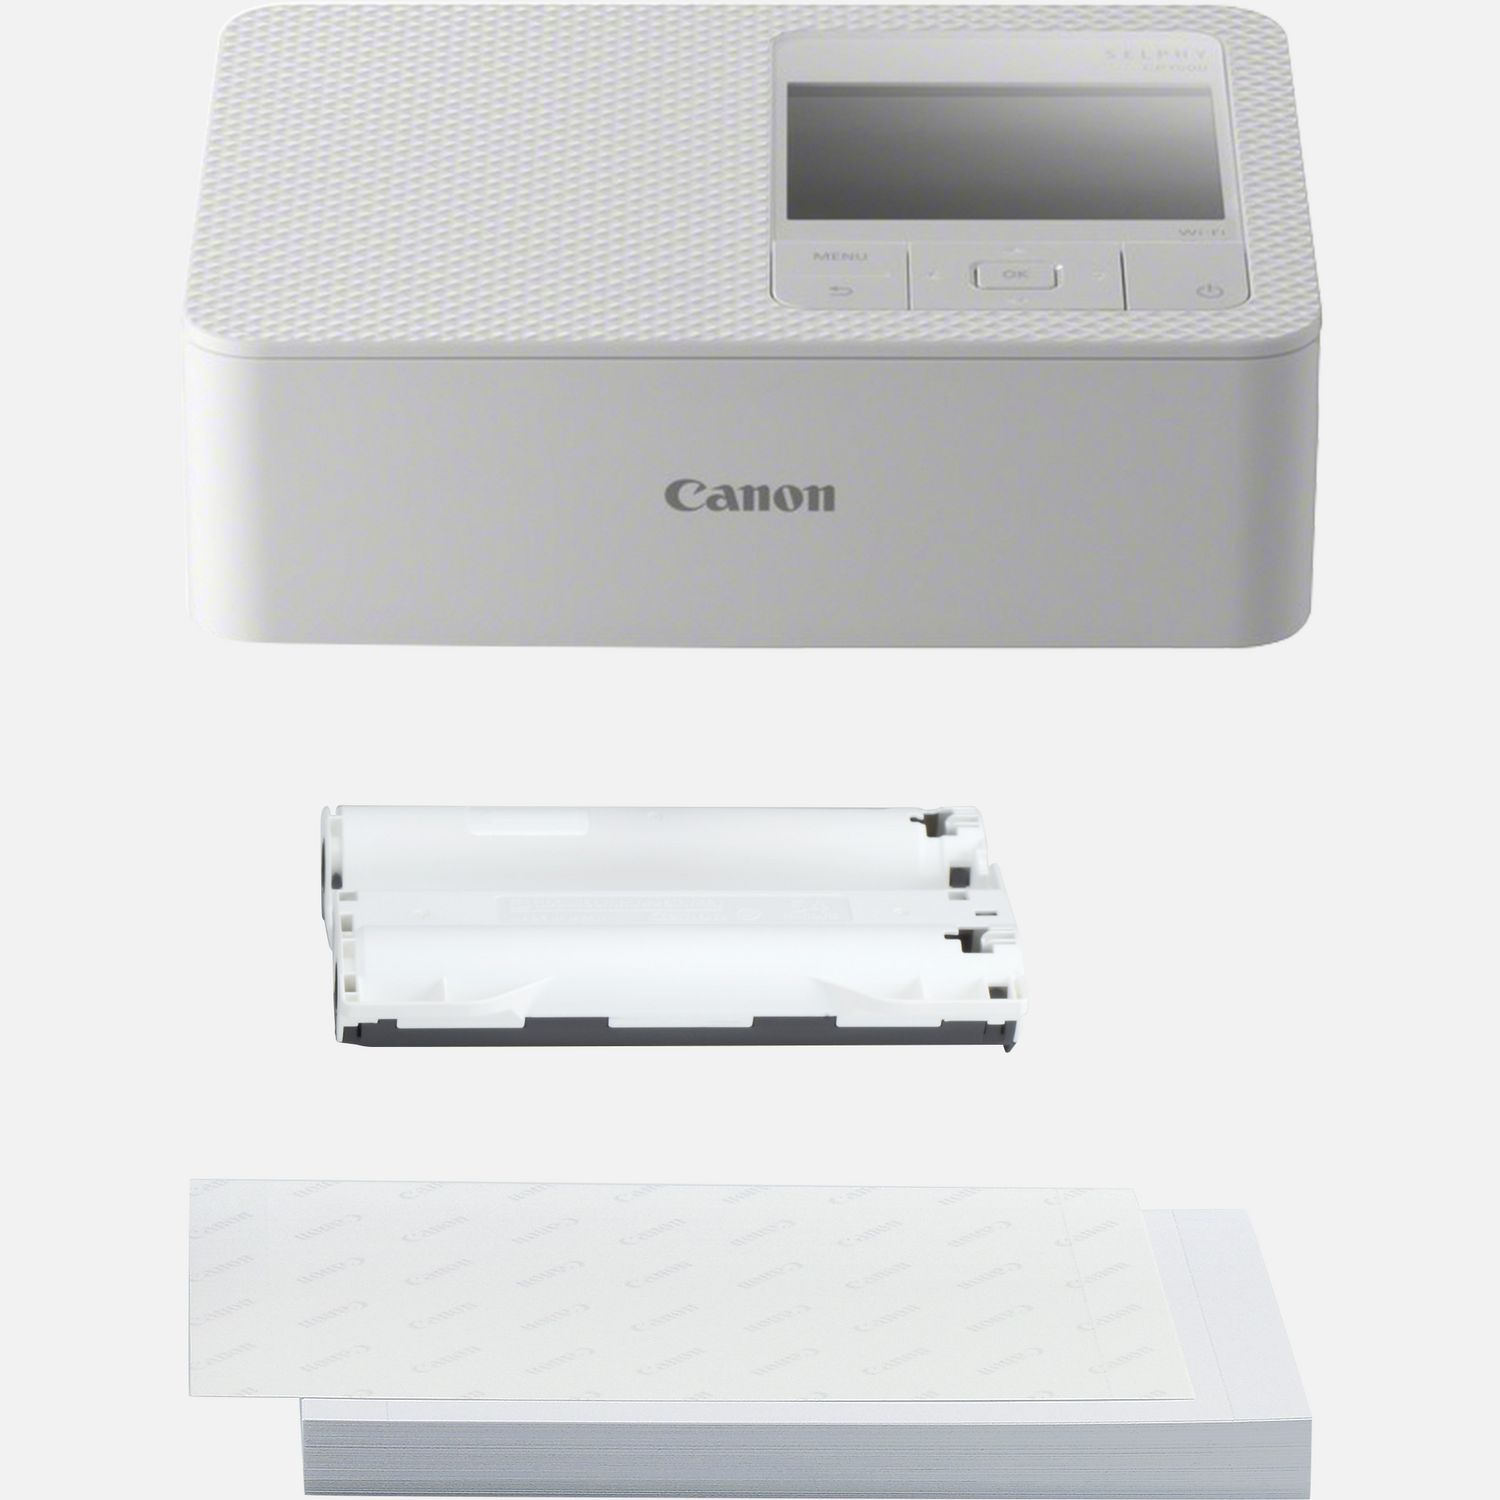 3 inch 5 inch 6 inch Paper Tray for Canon Selphy CP1500 CP1300 CP1200 CP910  CP900 Photo Paper Printer Card Size Paper Cassette - AliExpress